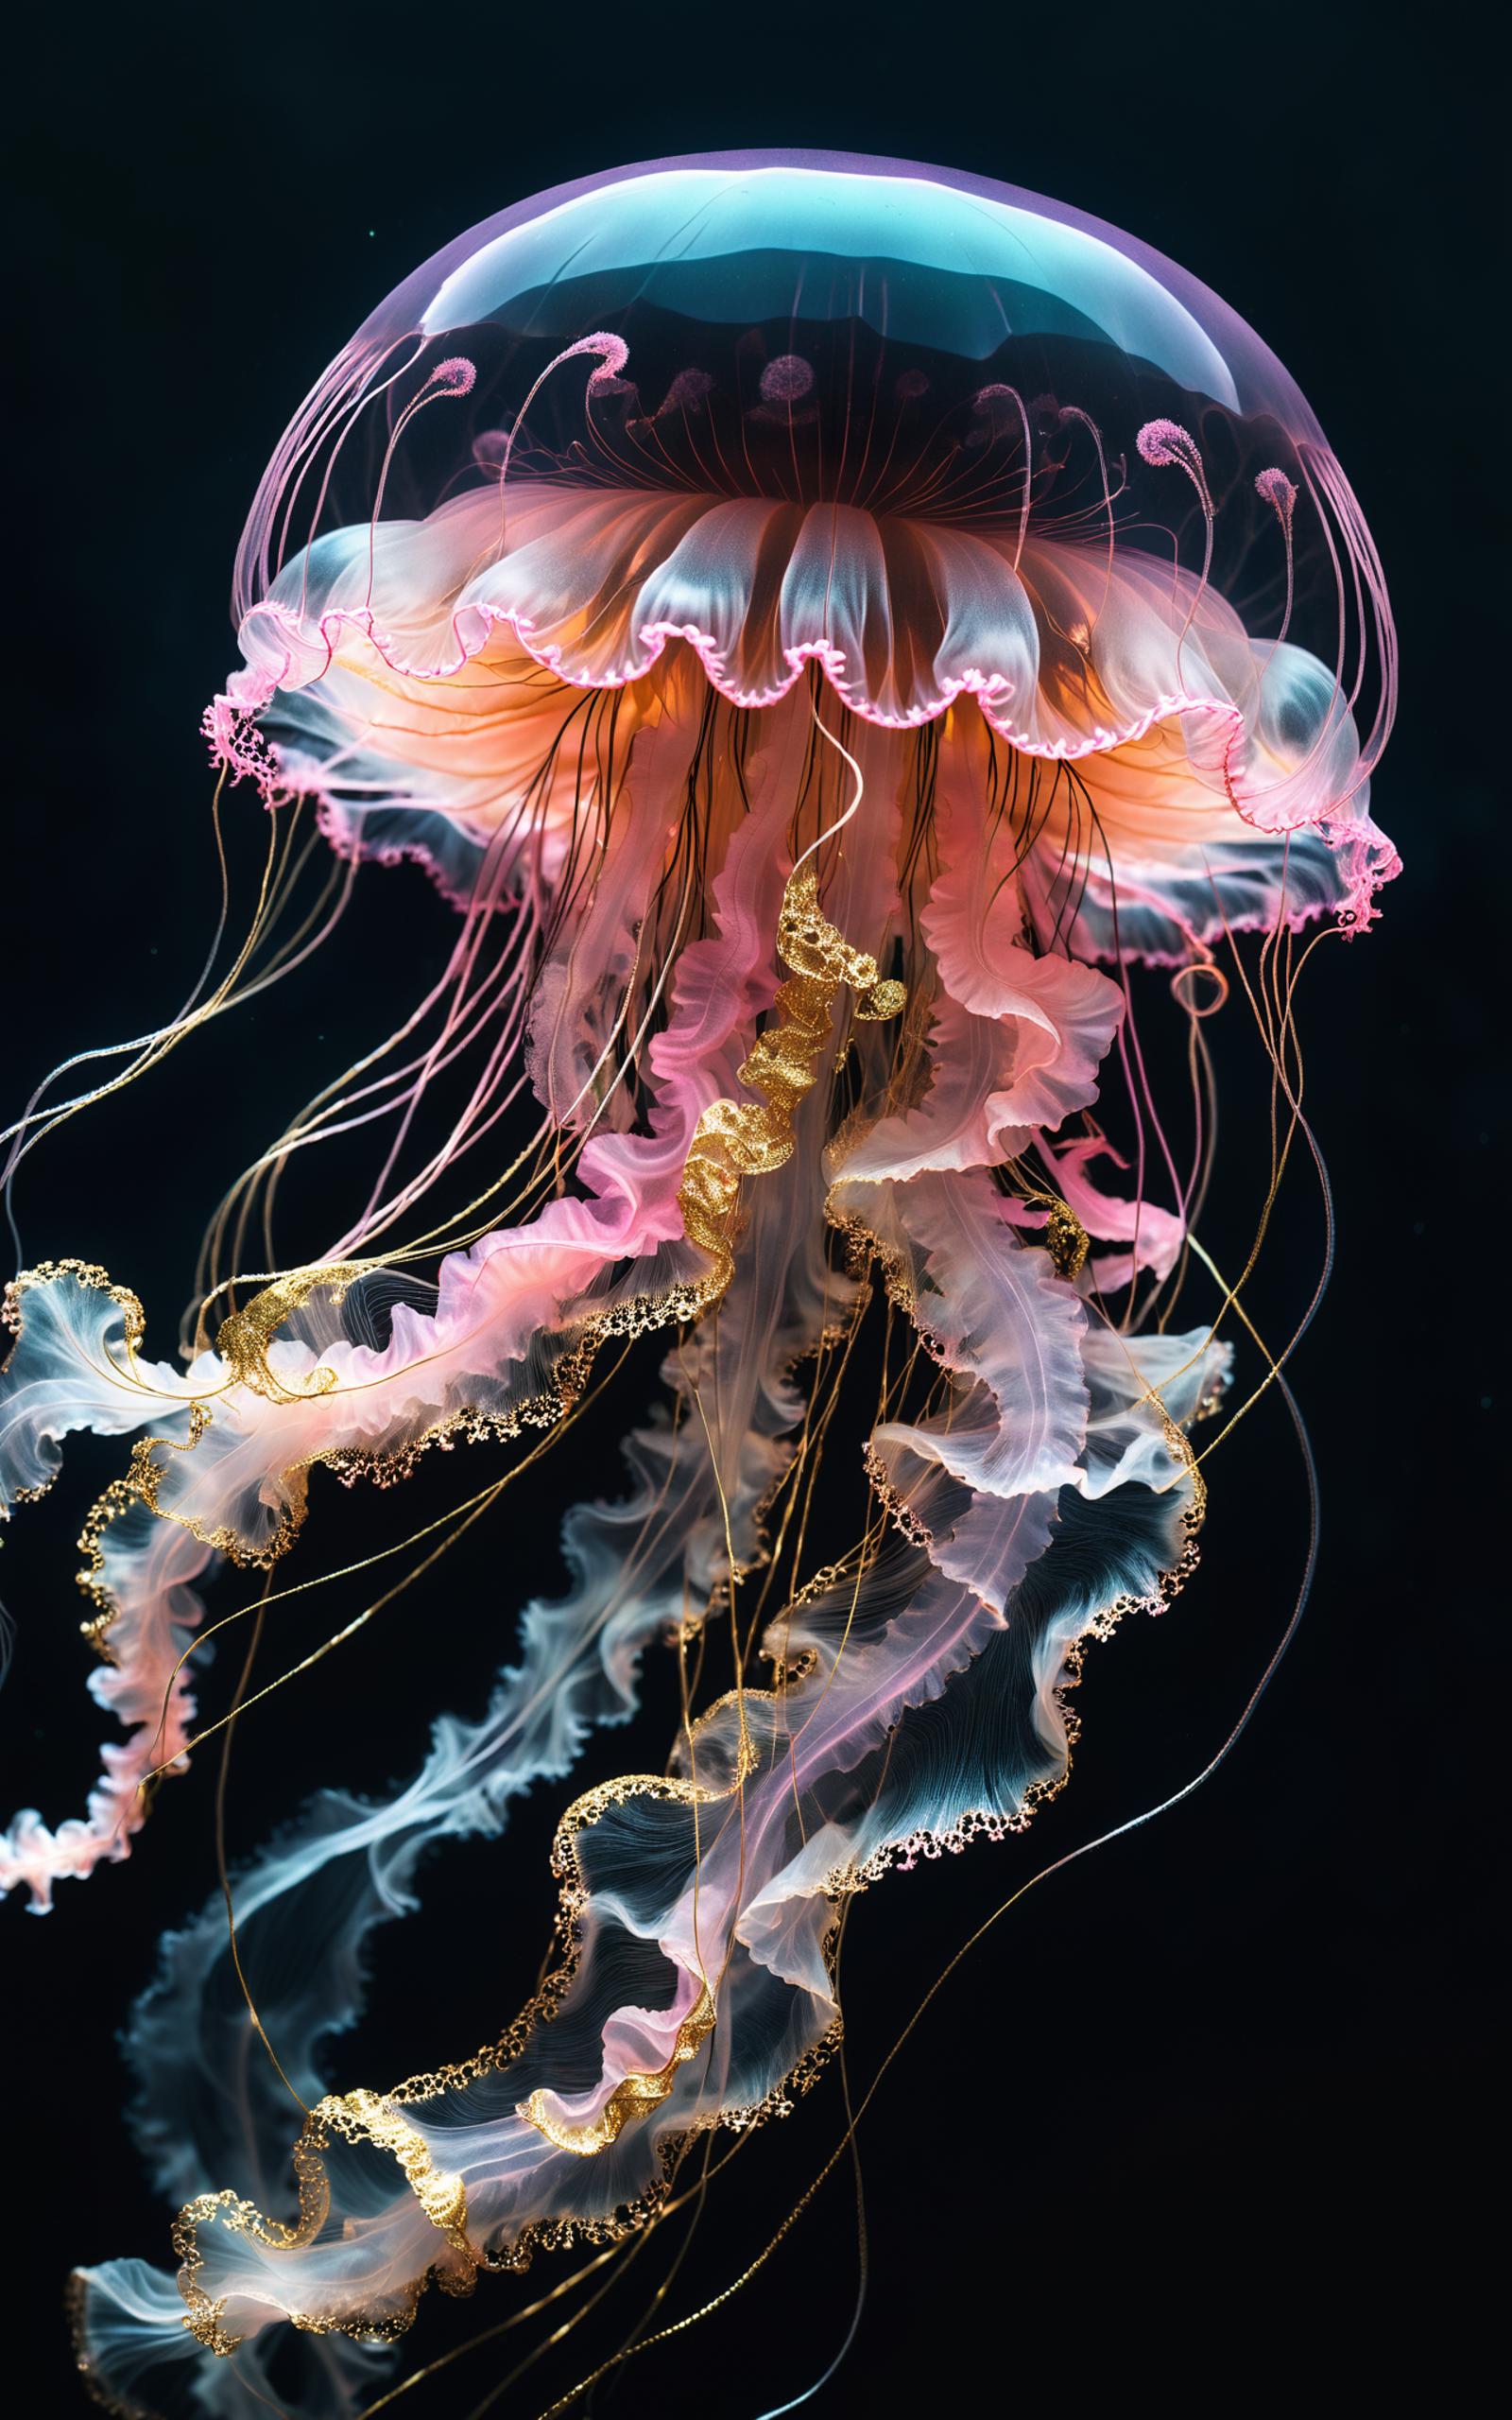 A large sea jellyfish with pink and gold tentacles in a dark background.